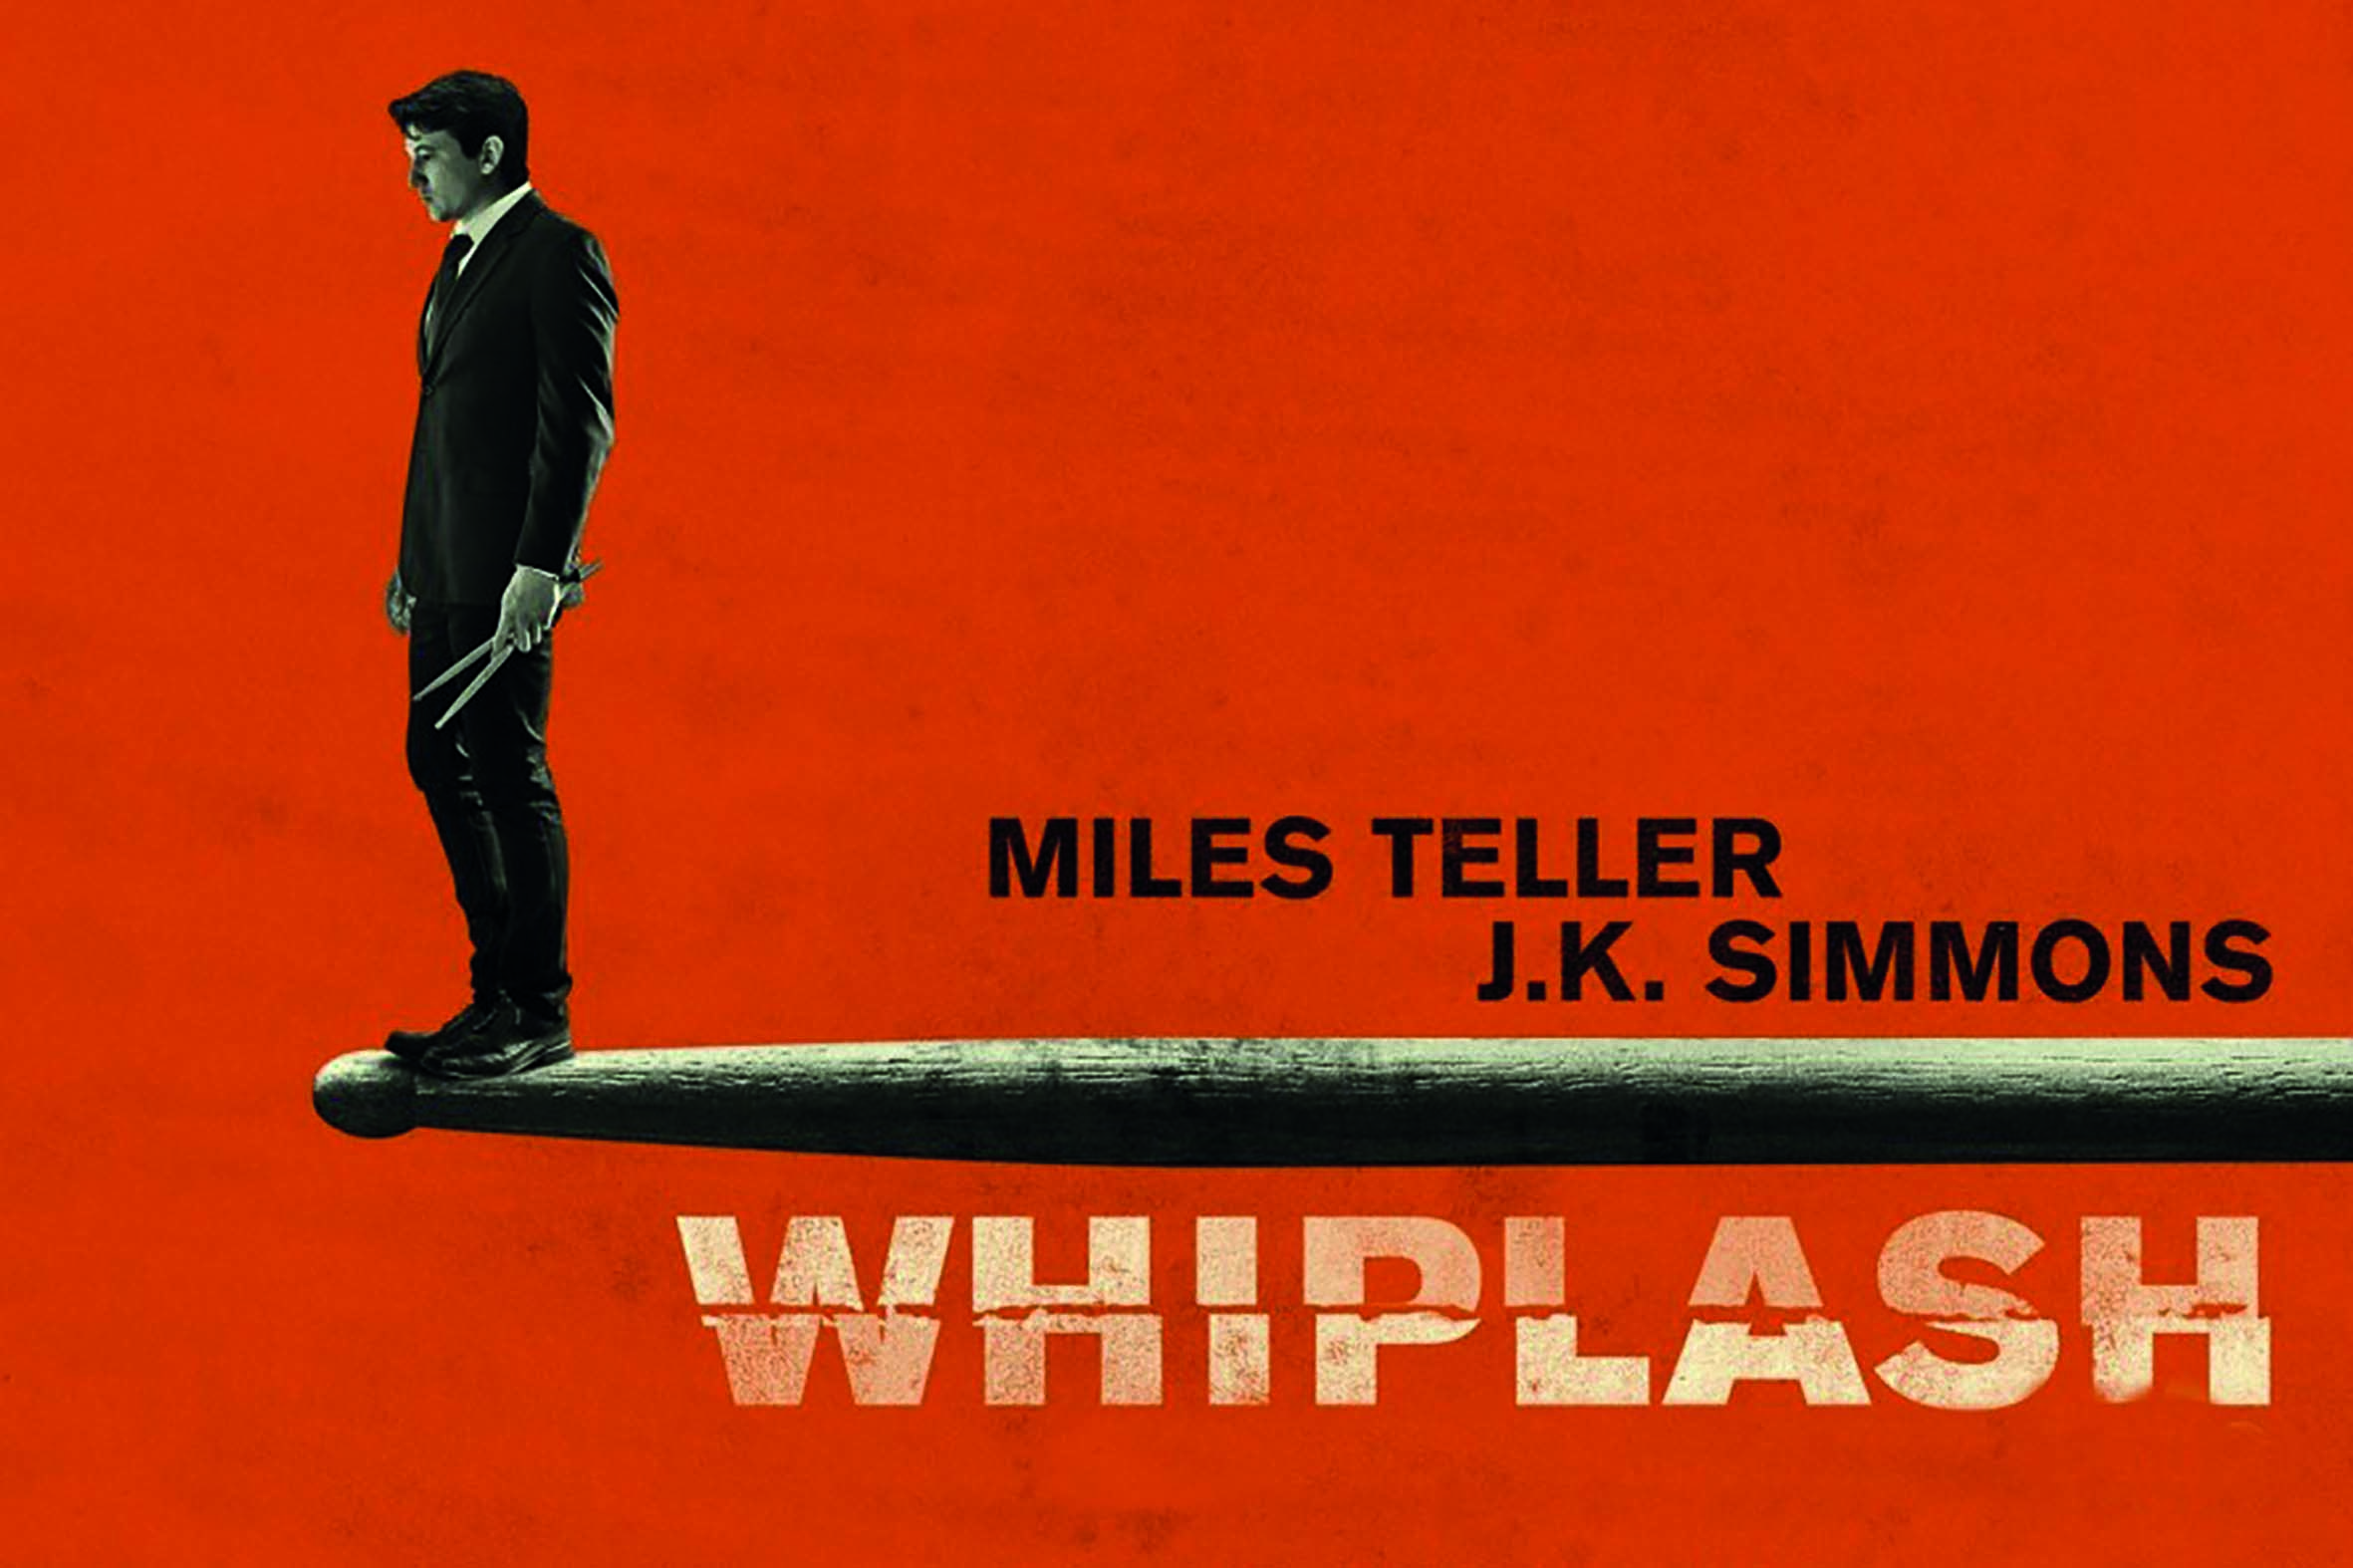 38-facts-about-the-movie-whiplash